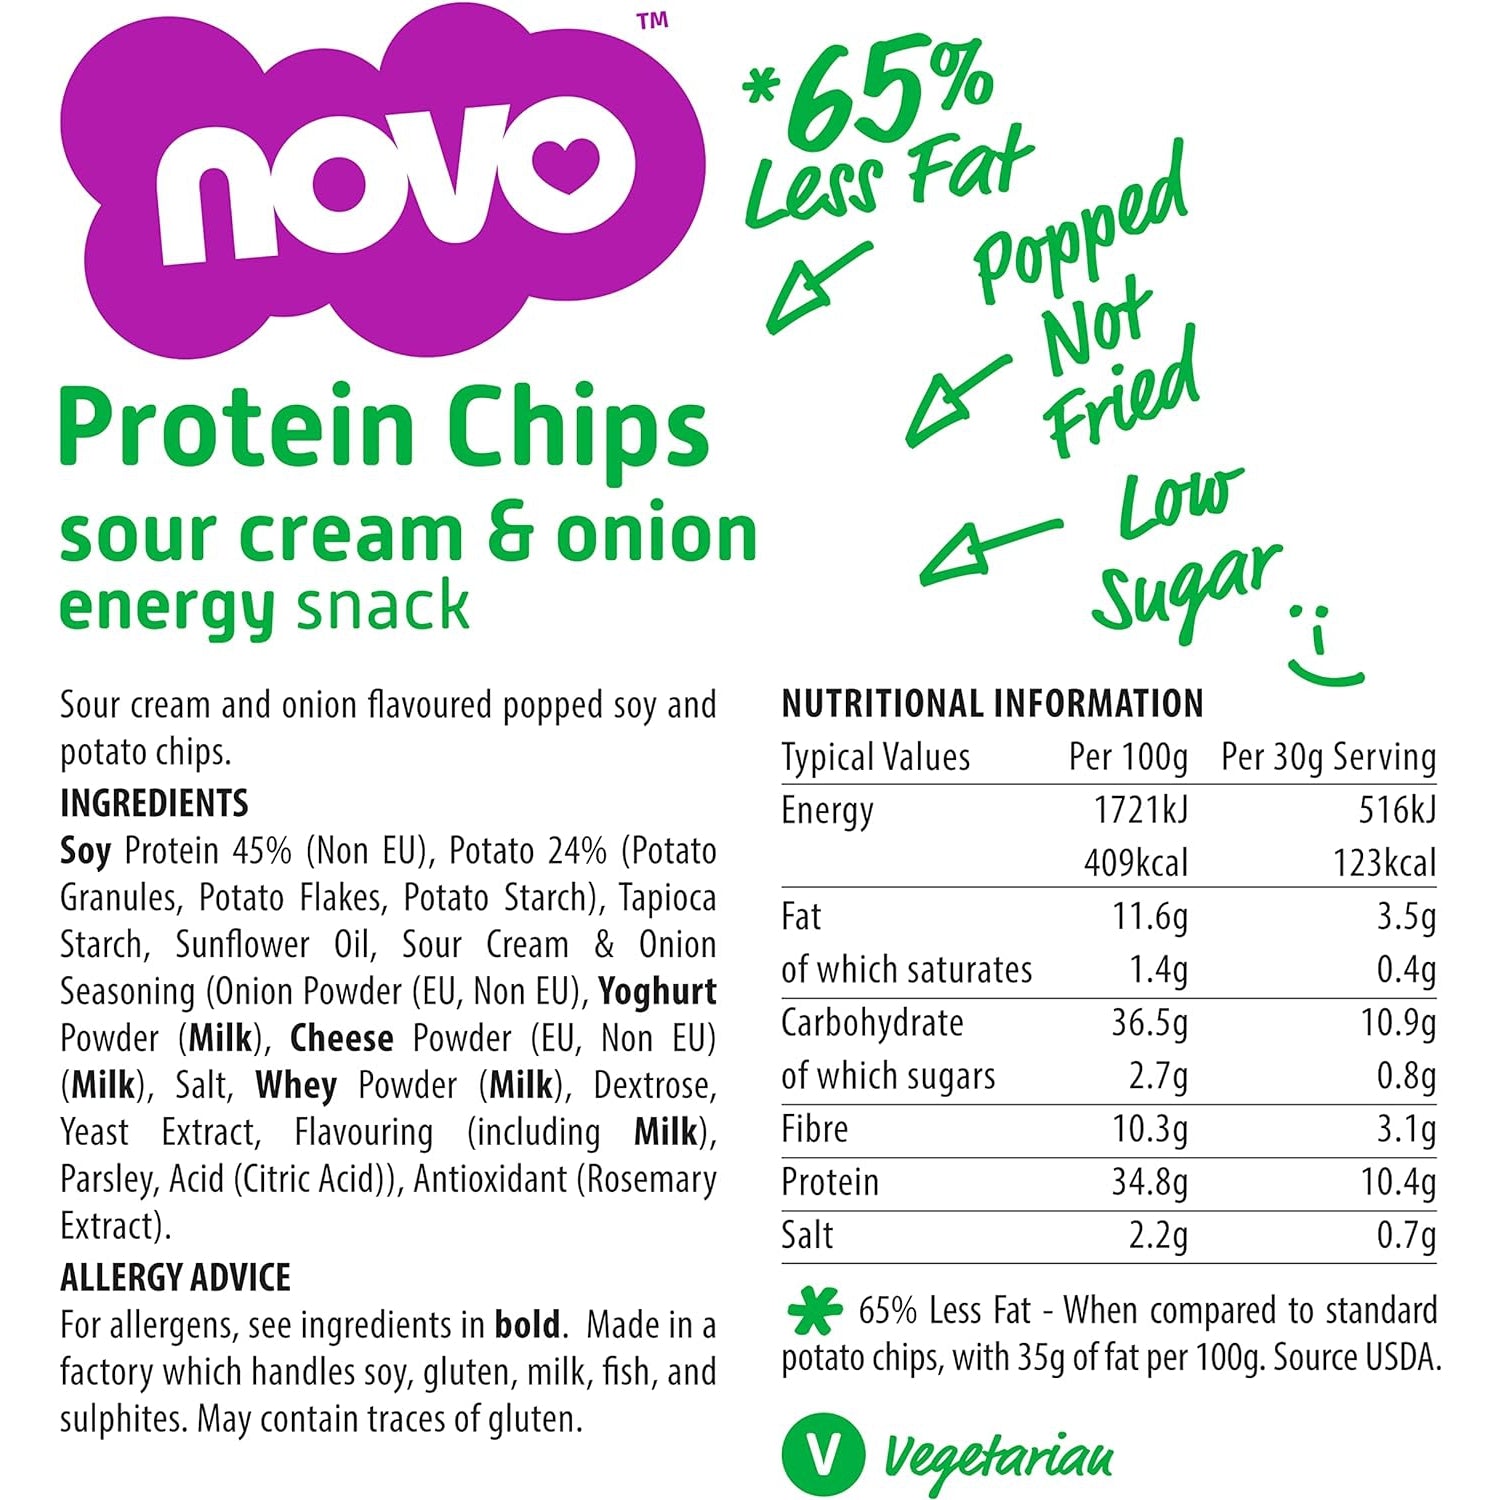 Novo Nutrition Protein Chips Healthy Savoury Snack with High Protein 30g - Sour Cream & Onion